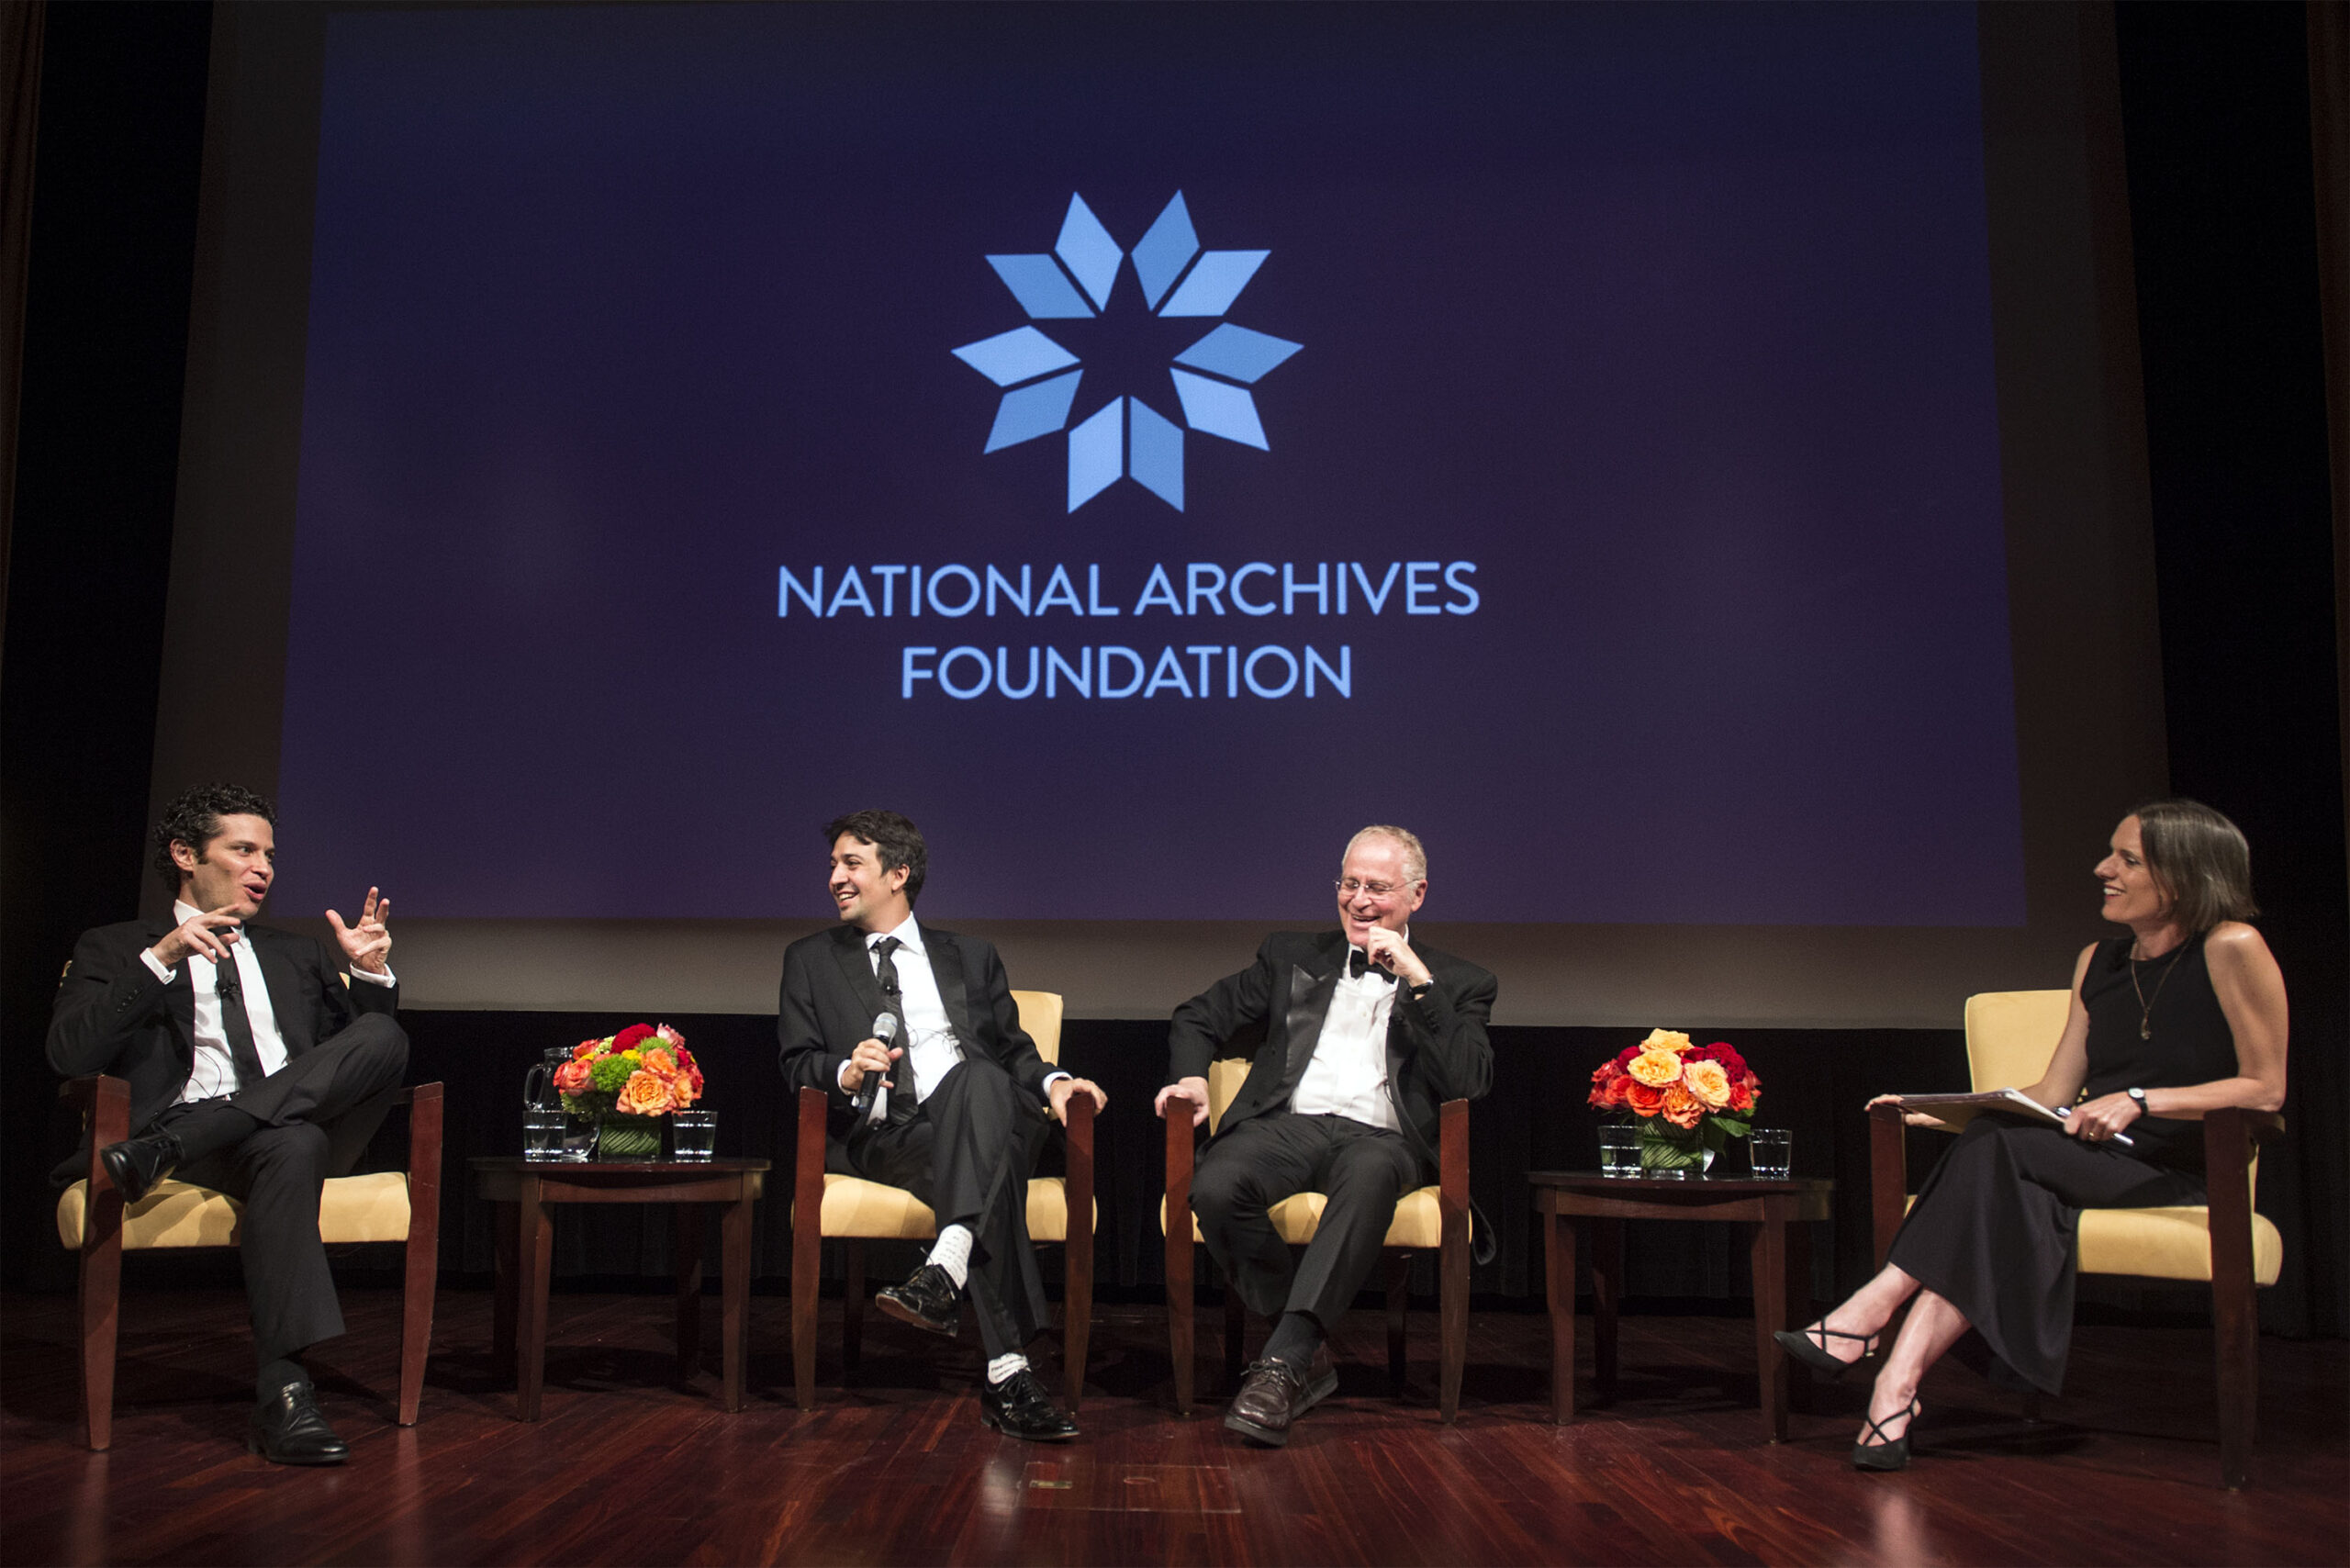 2016: Thomas Kail, Lin Manuel Miranda, and Ron Chernow in conversation with Rebecca Mead